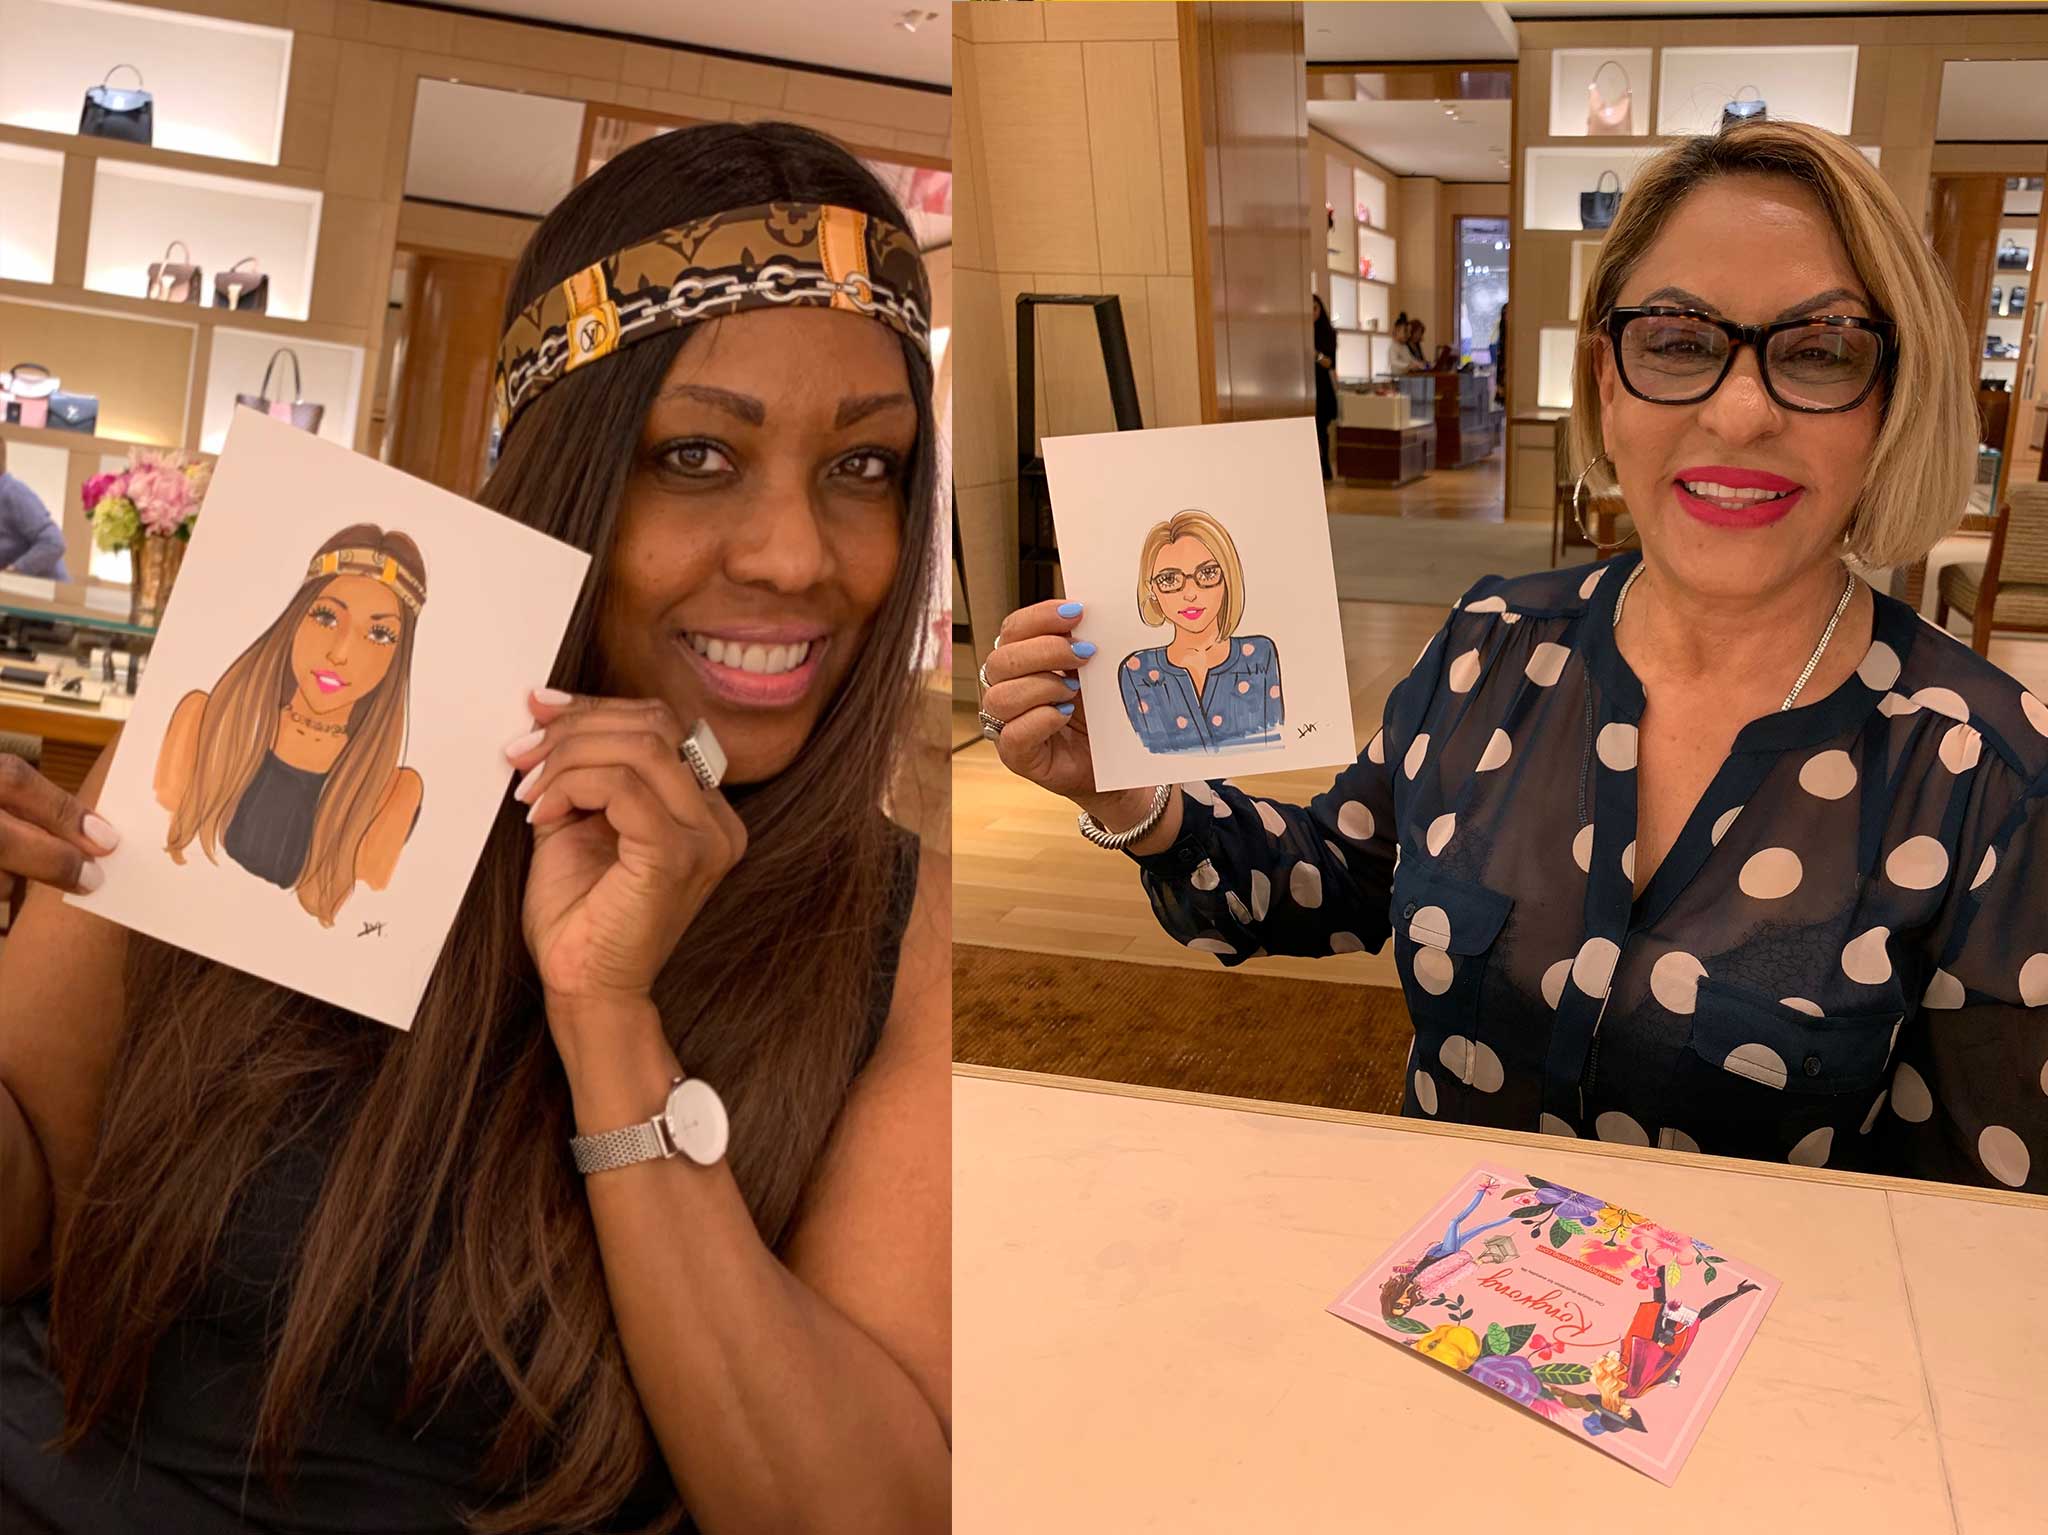 Fashion-illustrator-Rongrong-DeVoe-live-sketch-at-Louis-Vuitton-store-in-Houston-for-mother's-day-2019.jpg